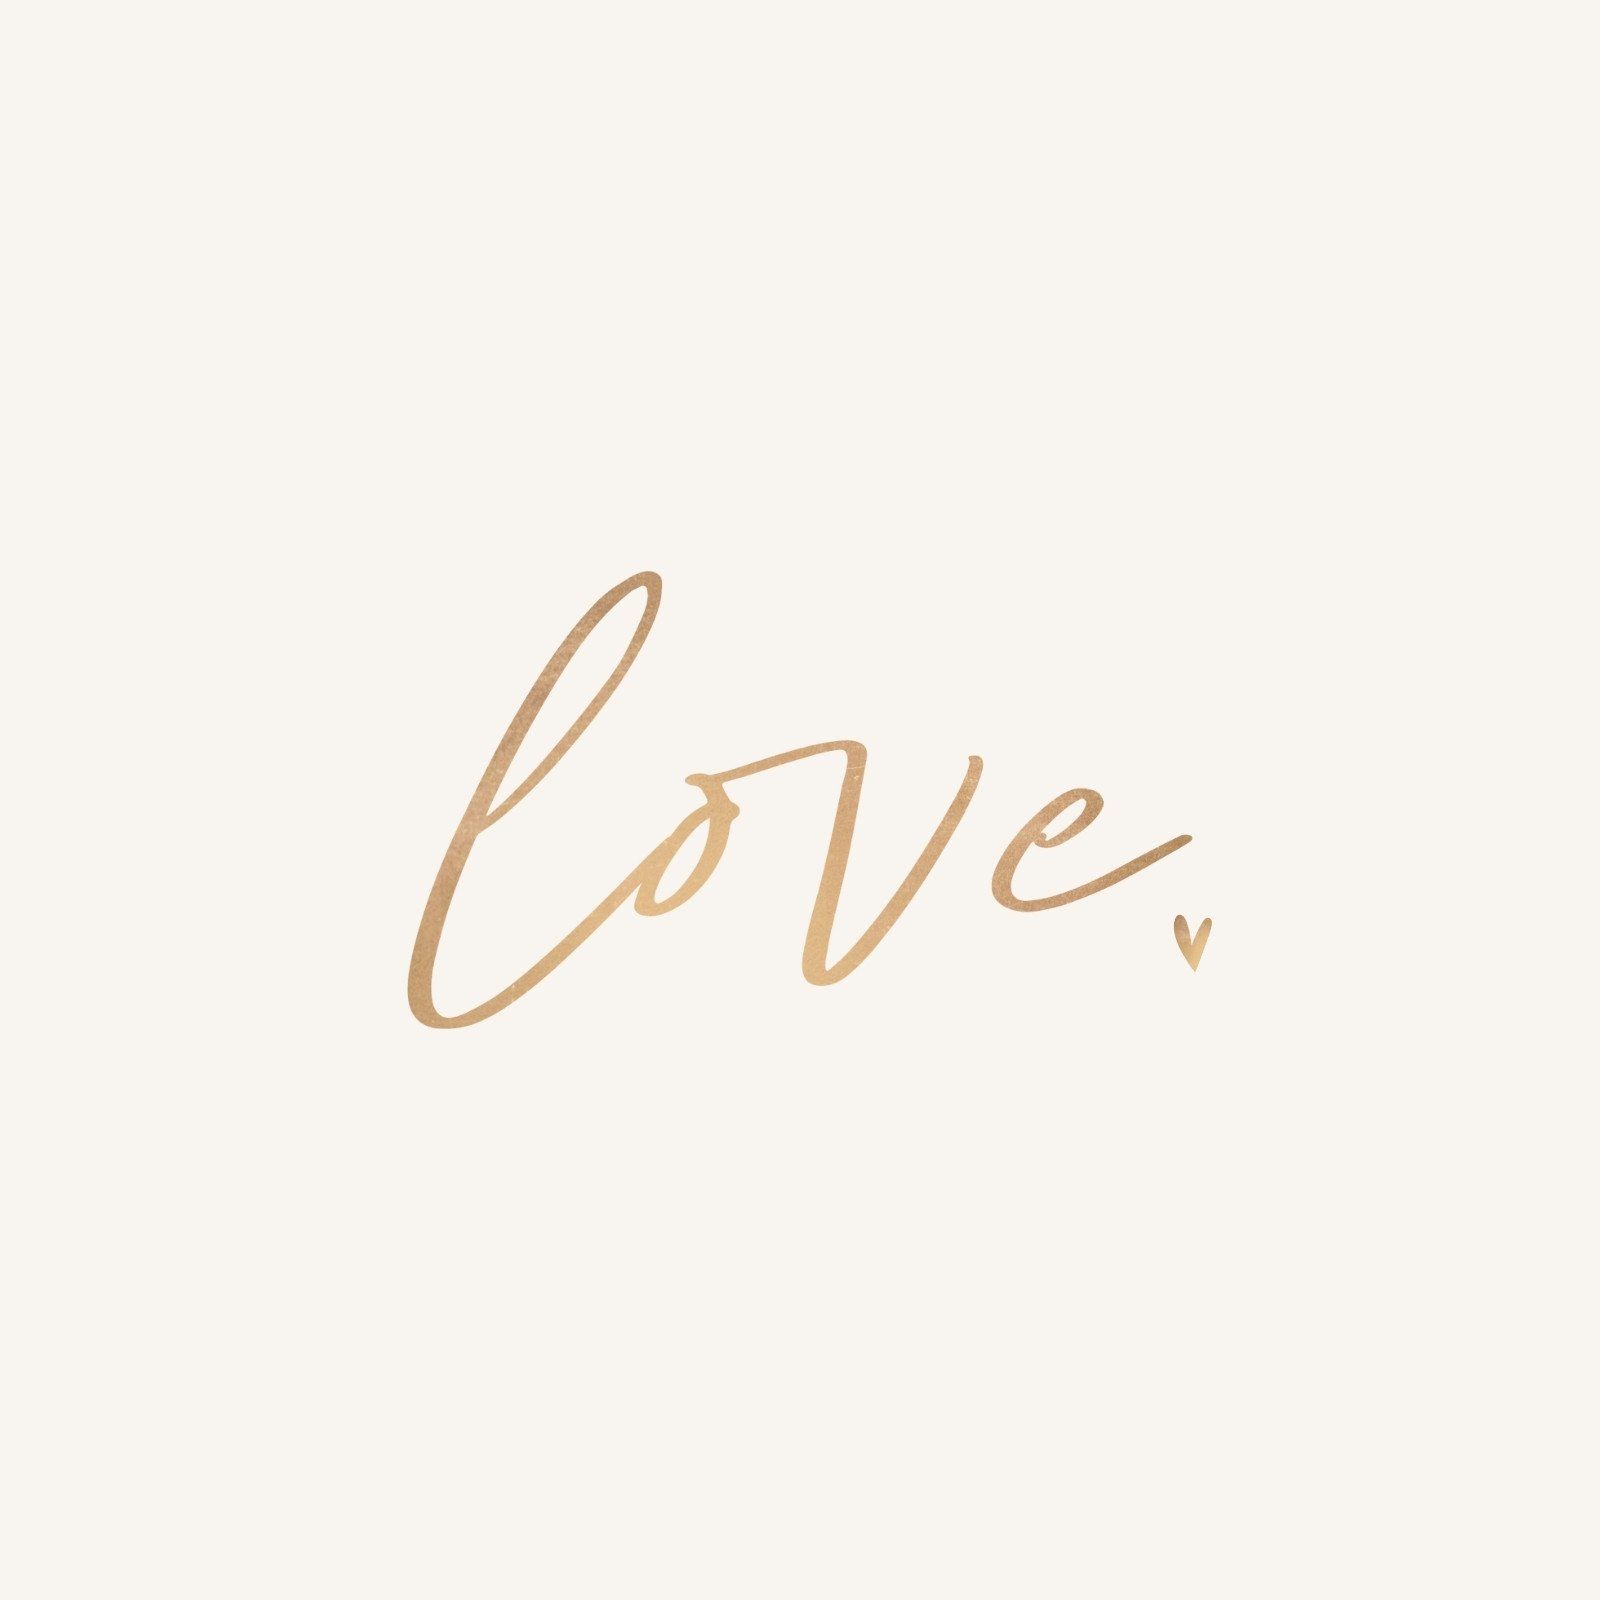 A gold foil love logo on white background - Calligraphy